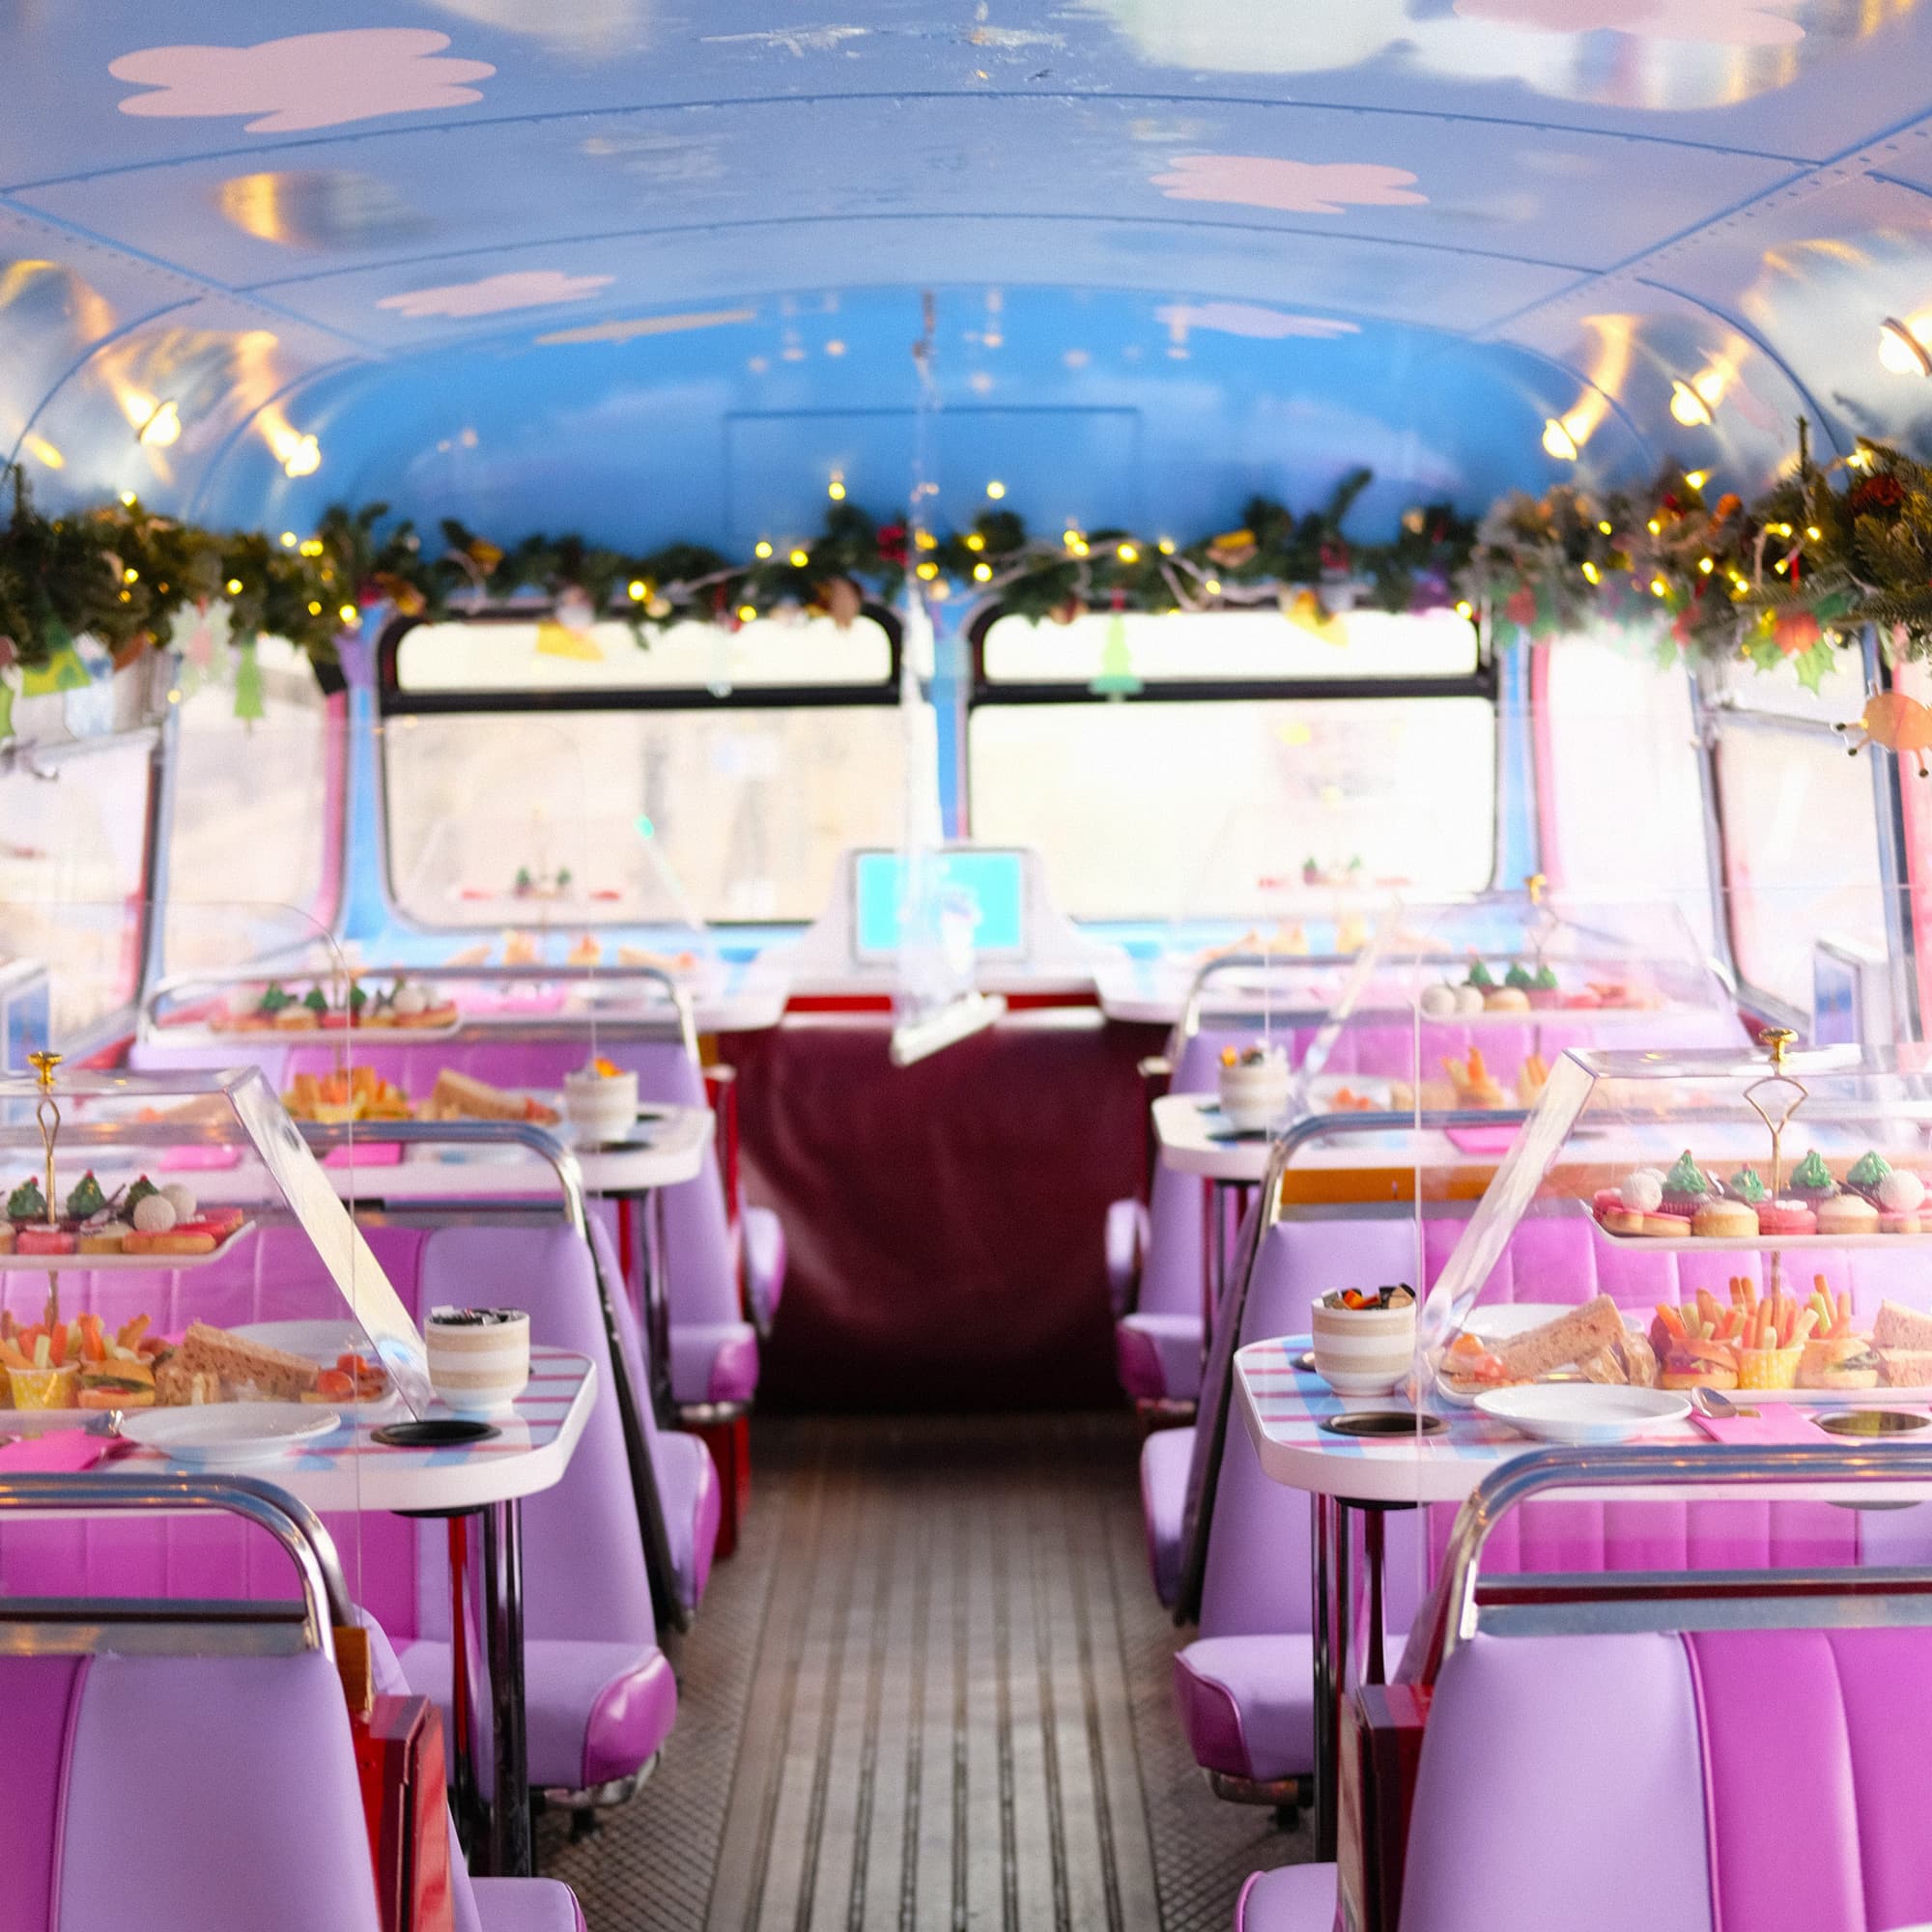 Christmas Lights Afternoon Tea Bus Tour in London: Peppa Pig